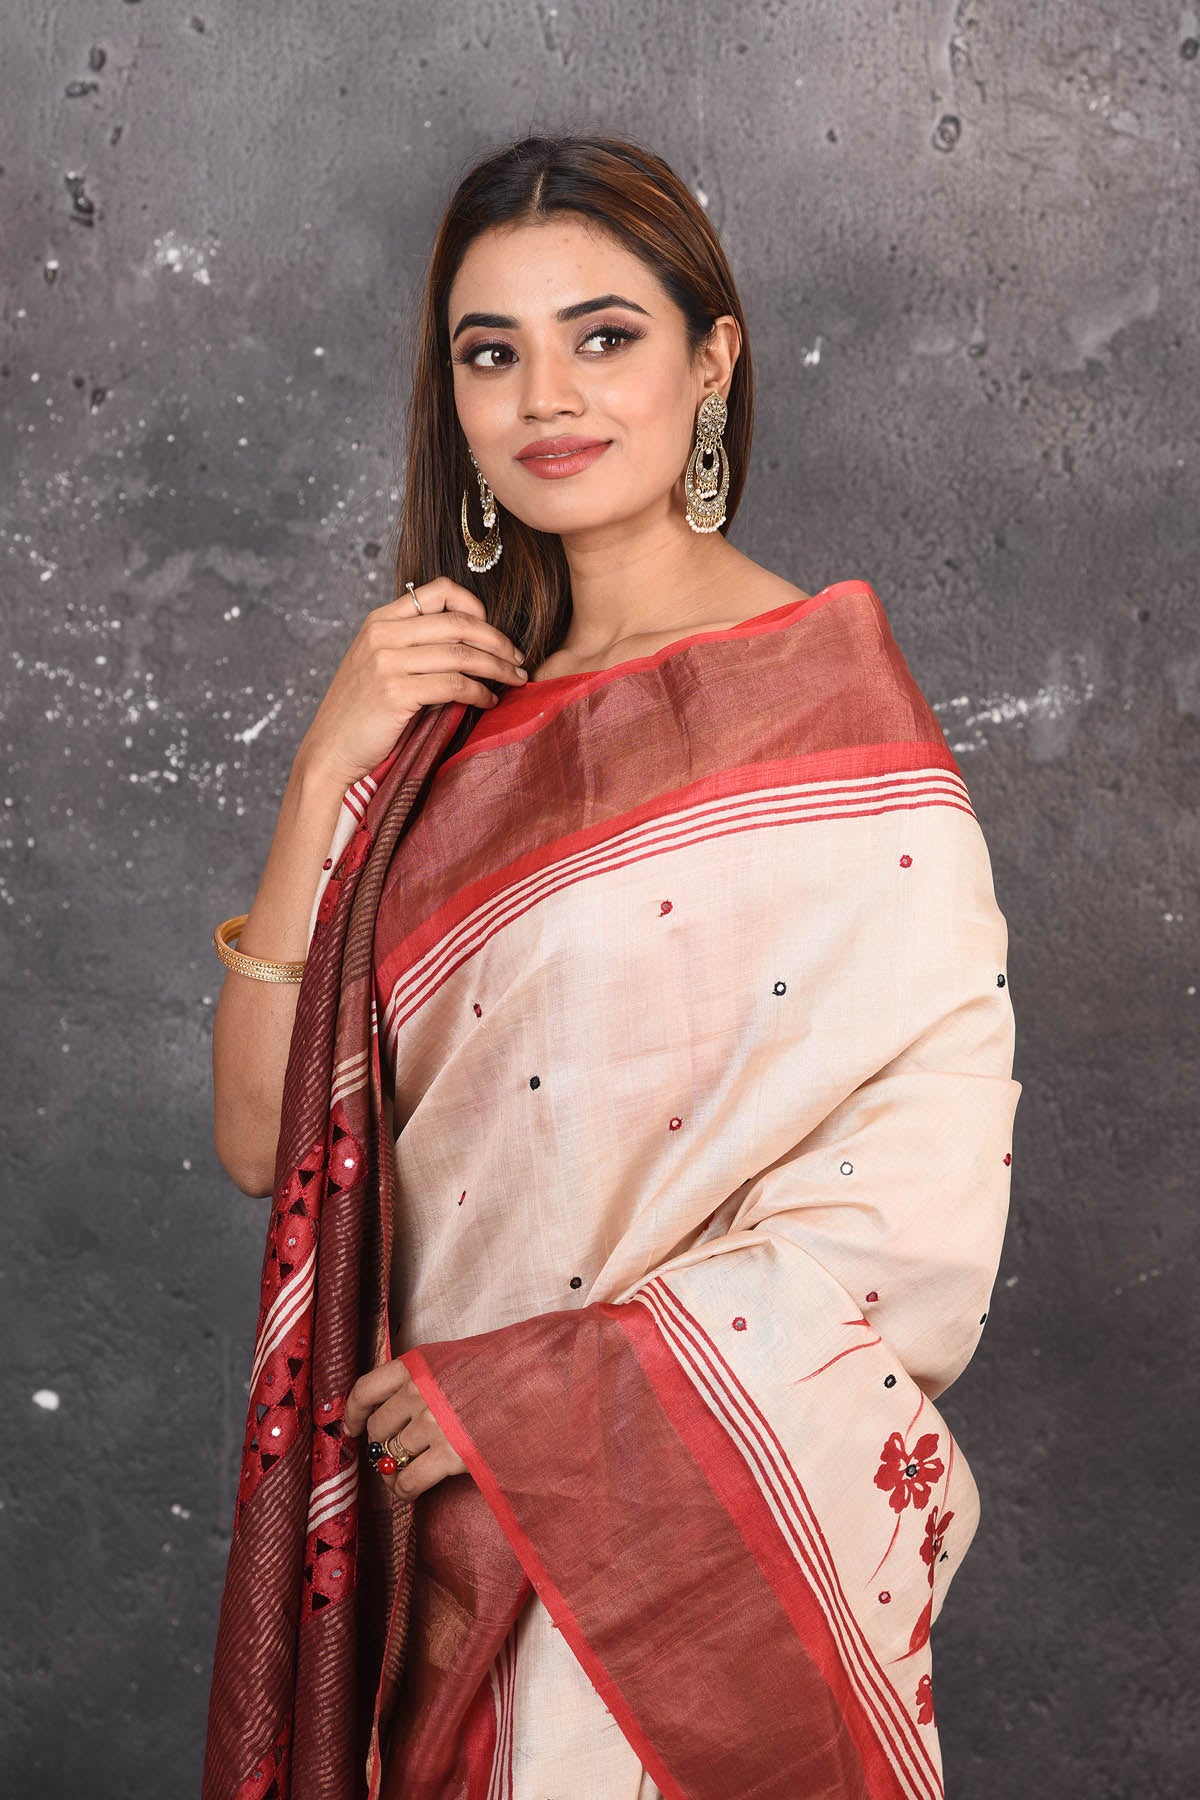 Buy this elegant offwhite-red pure tussar saree with floral embroidered hand cutwork border online in USA which is handcrafted from fine silk tussar fabric, this tie and dye saree brings out the nature of flow. You can pair this beautiful floral embroidered print saree with minimal jewellery for a casual day outfit. Add this pure tussar saree to your collection from Pure Elegance Indian fashion store in USA.-Close up.